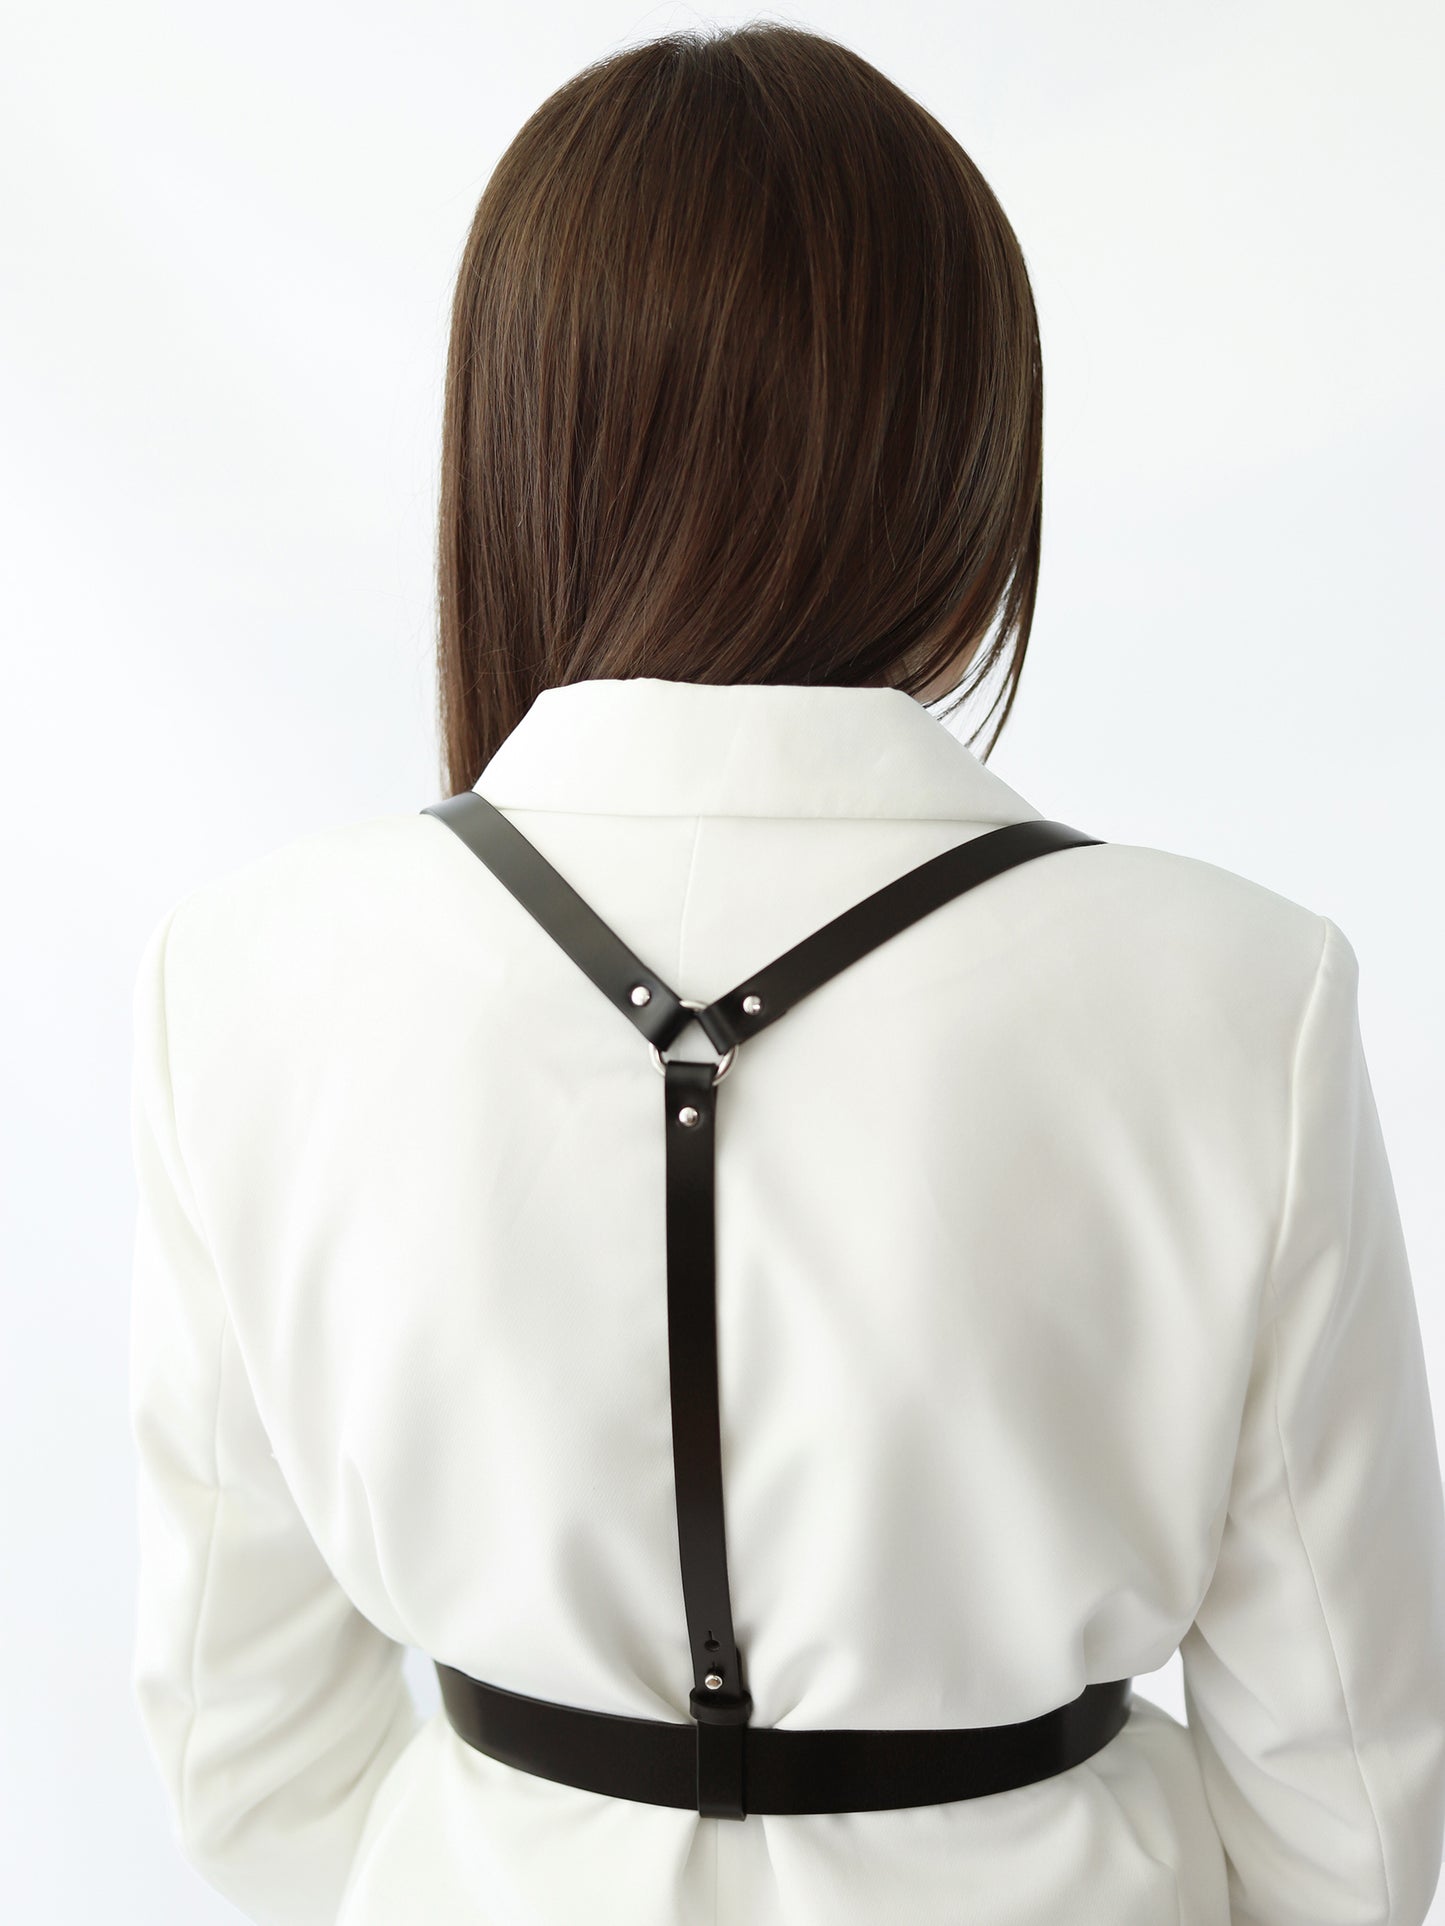 Back view of the leather suspender harness.